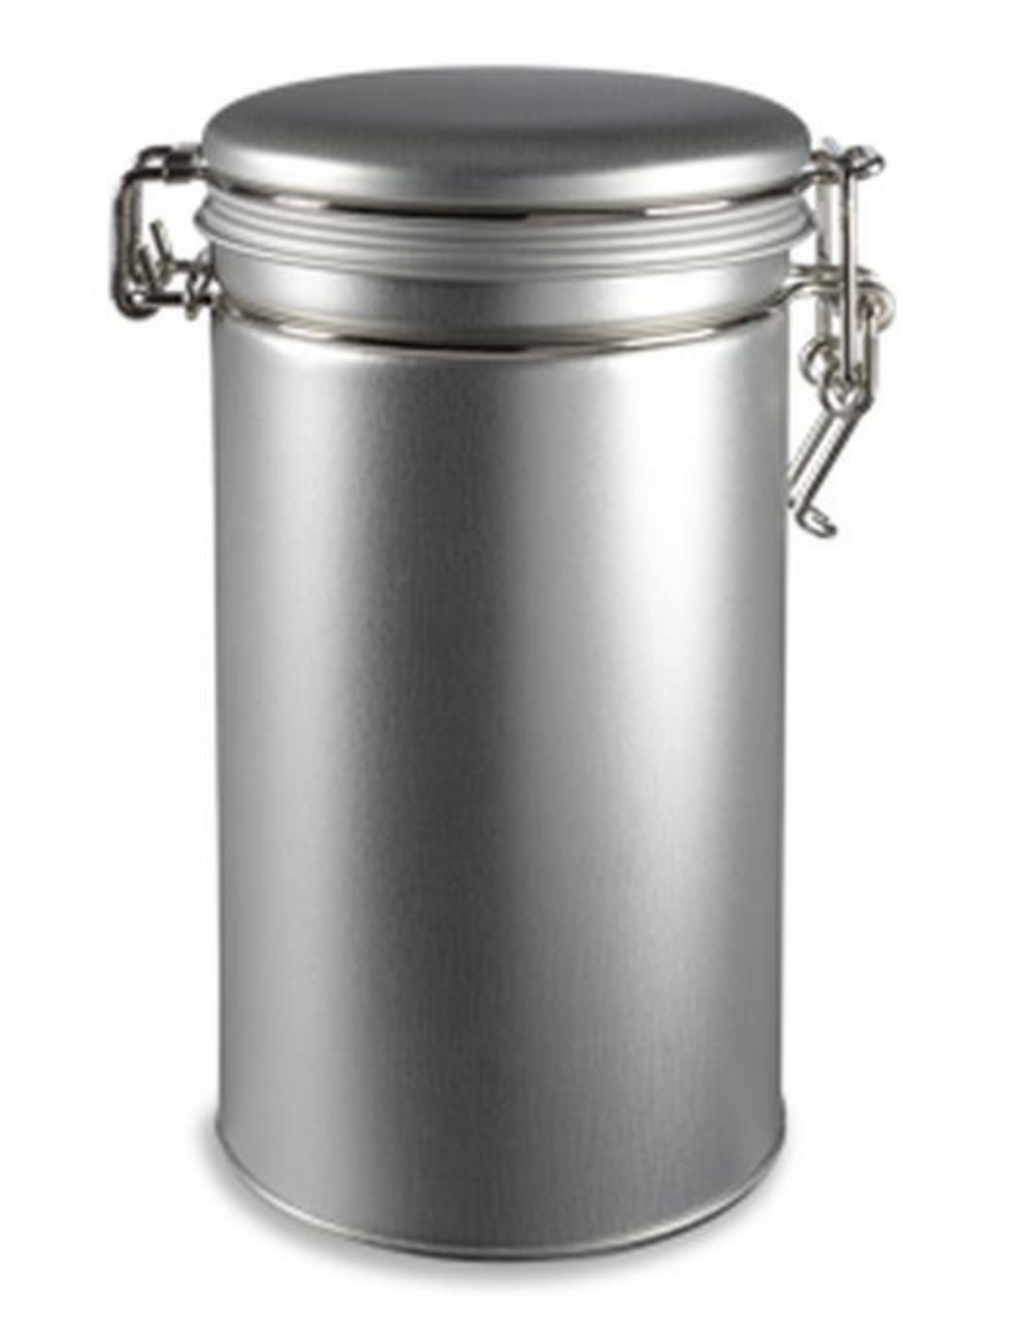 Round Tea Tin Canister with Latch Cover